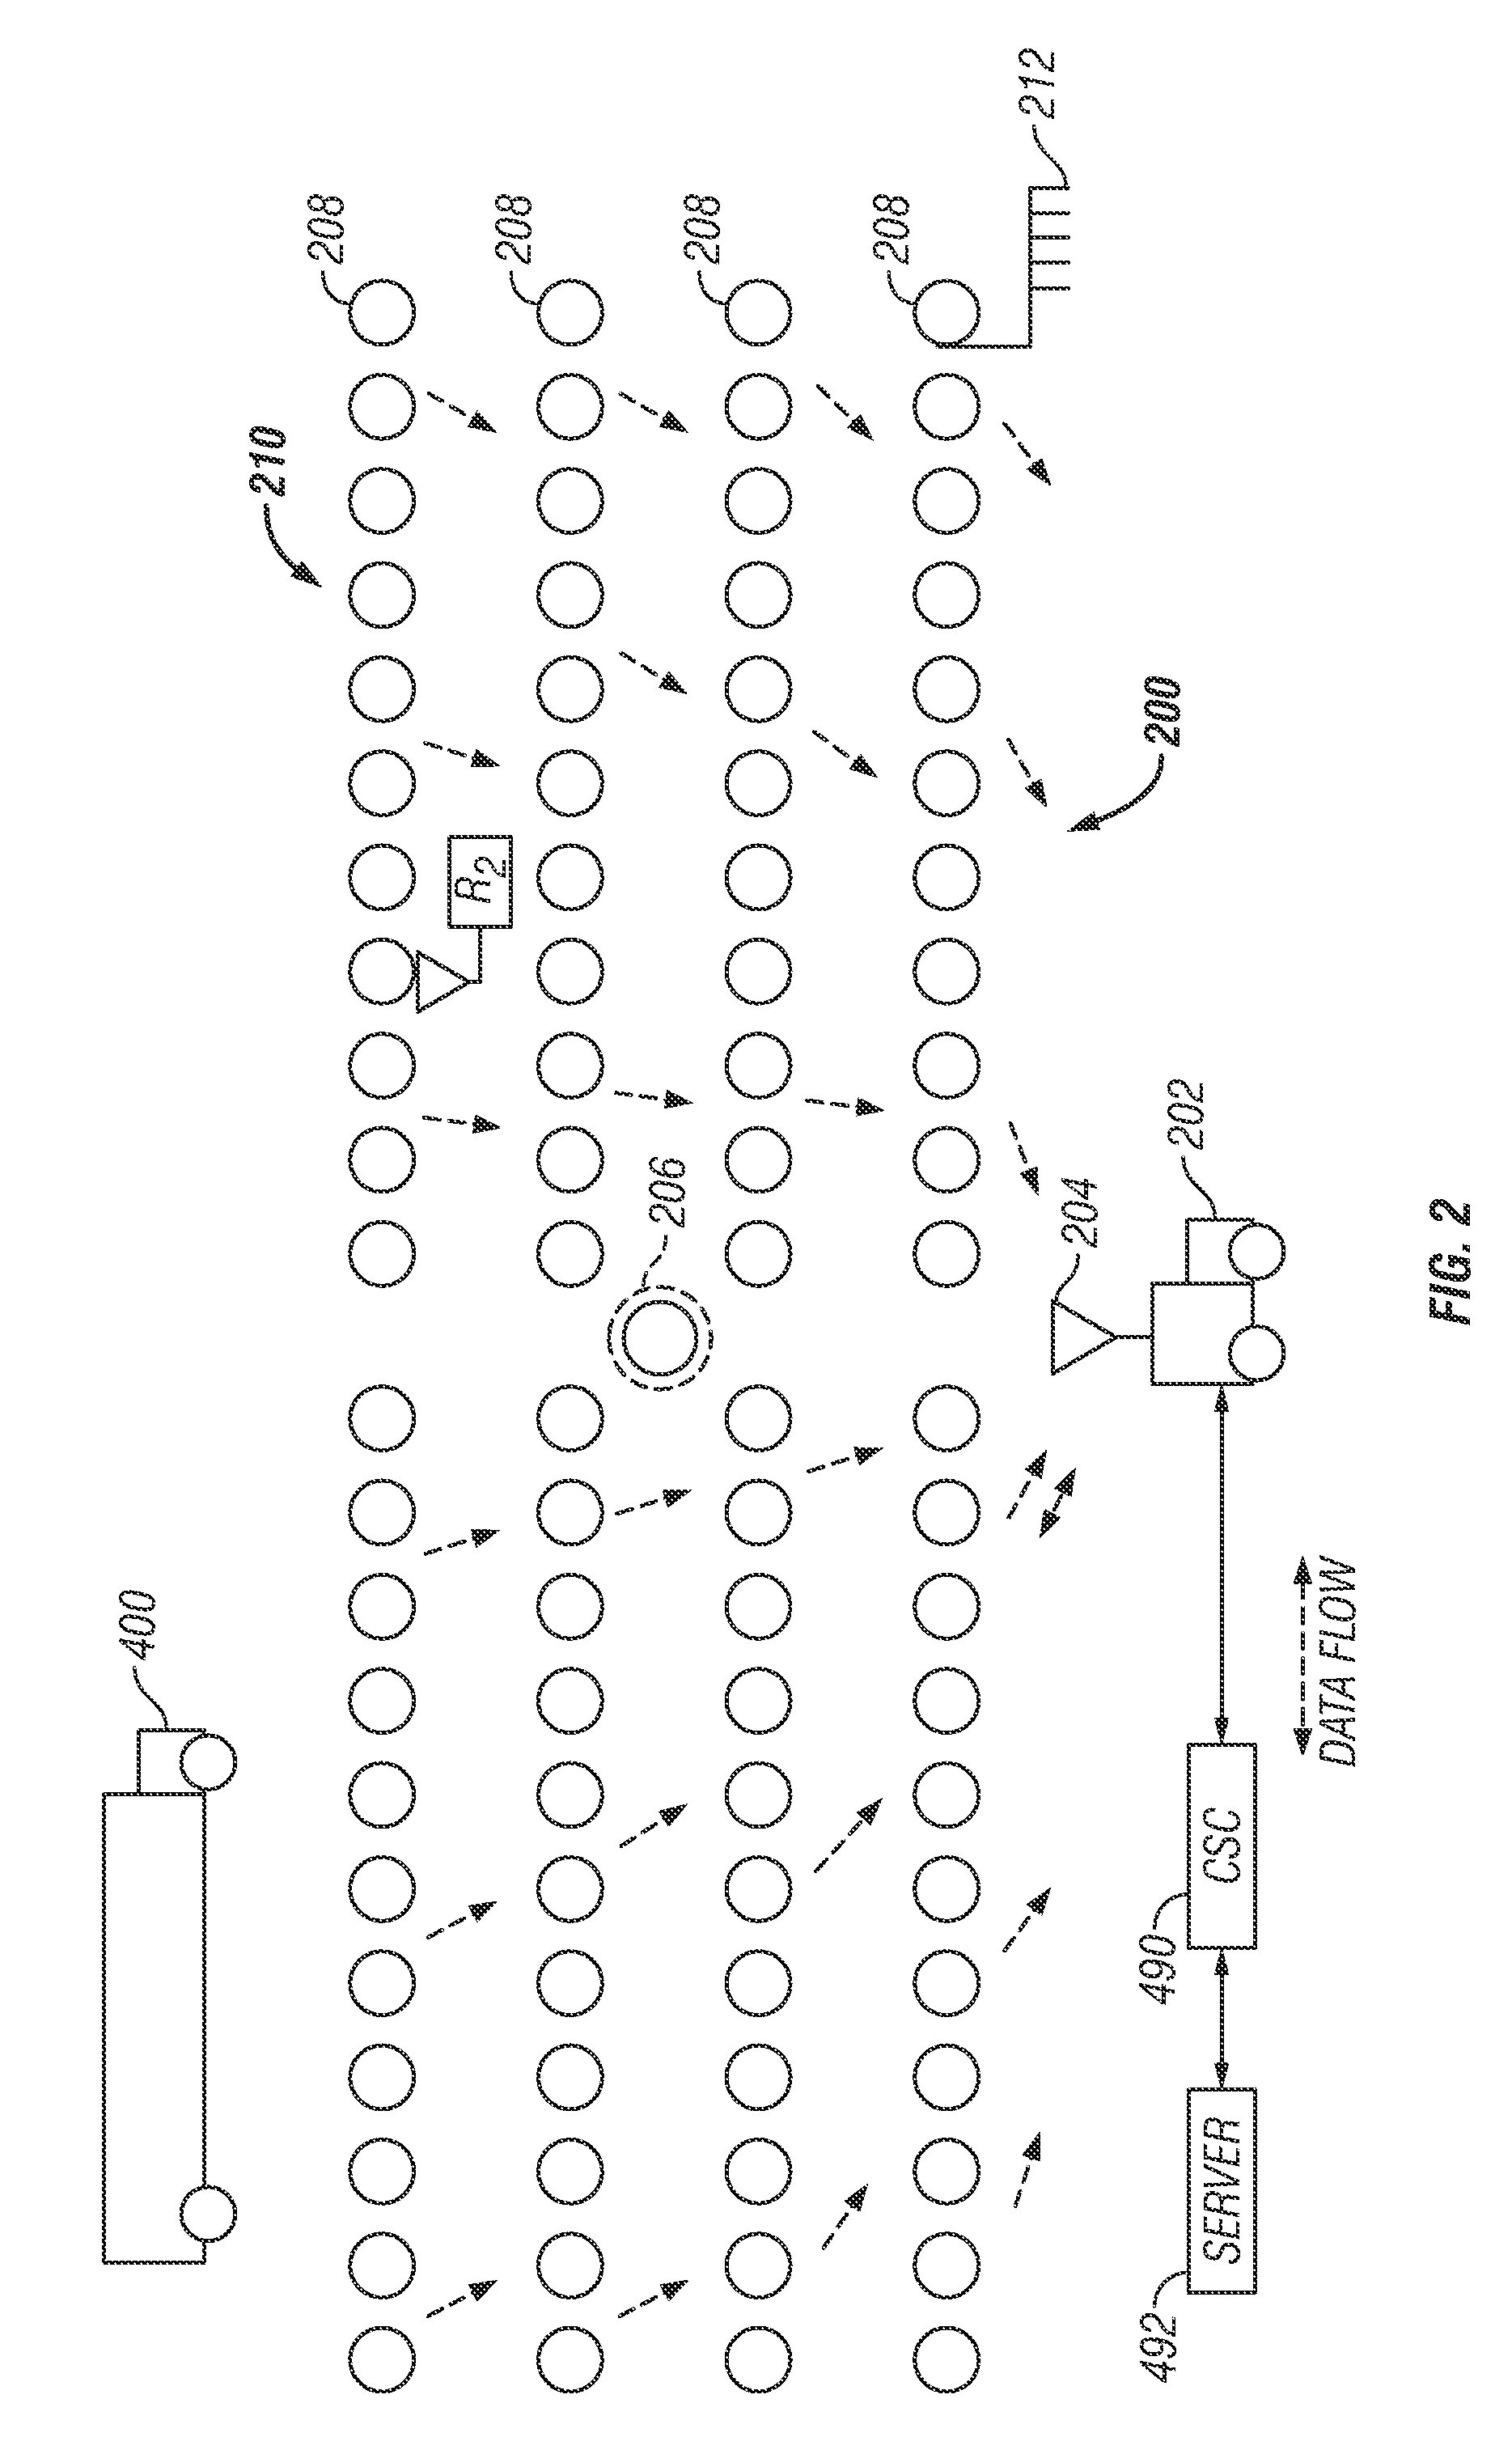 In-Field Control Module for Managing Wireless Seismic Data Acquisition Systems and Related Methods